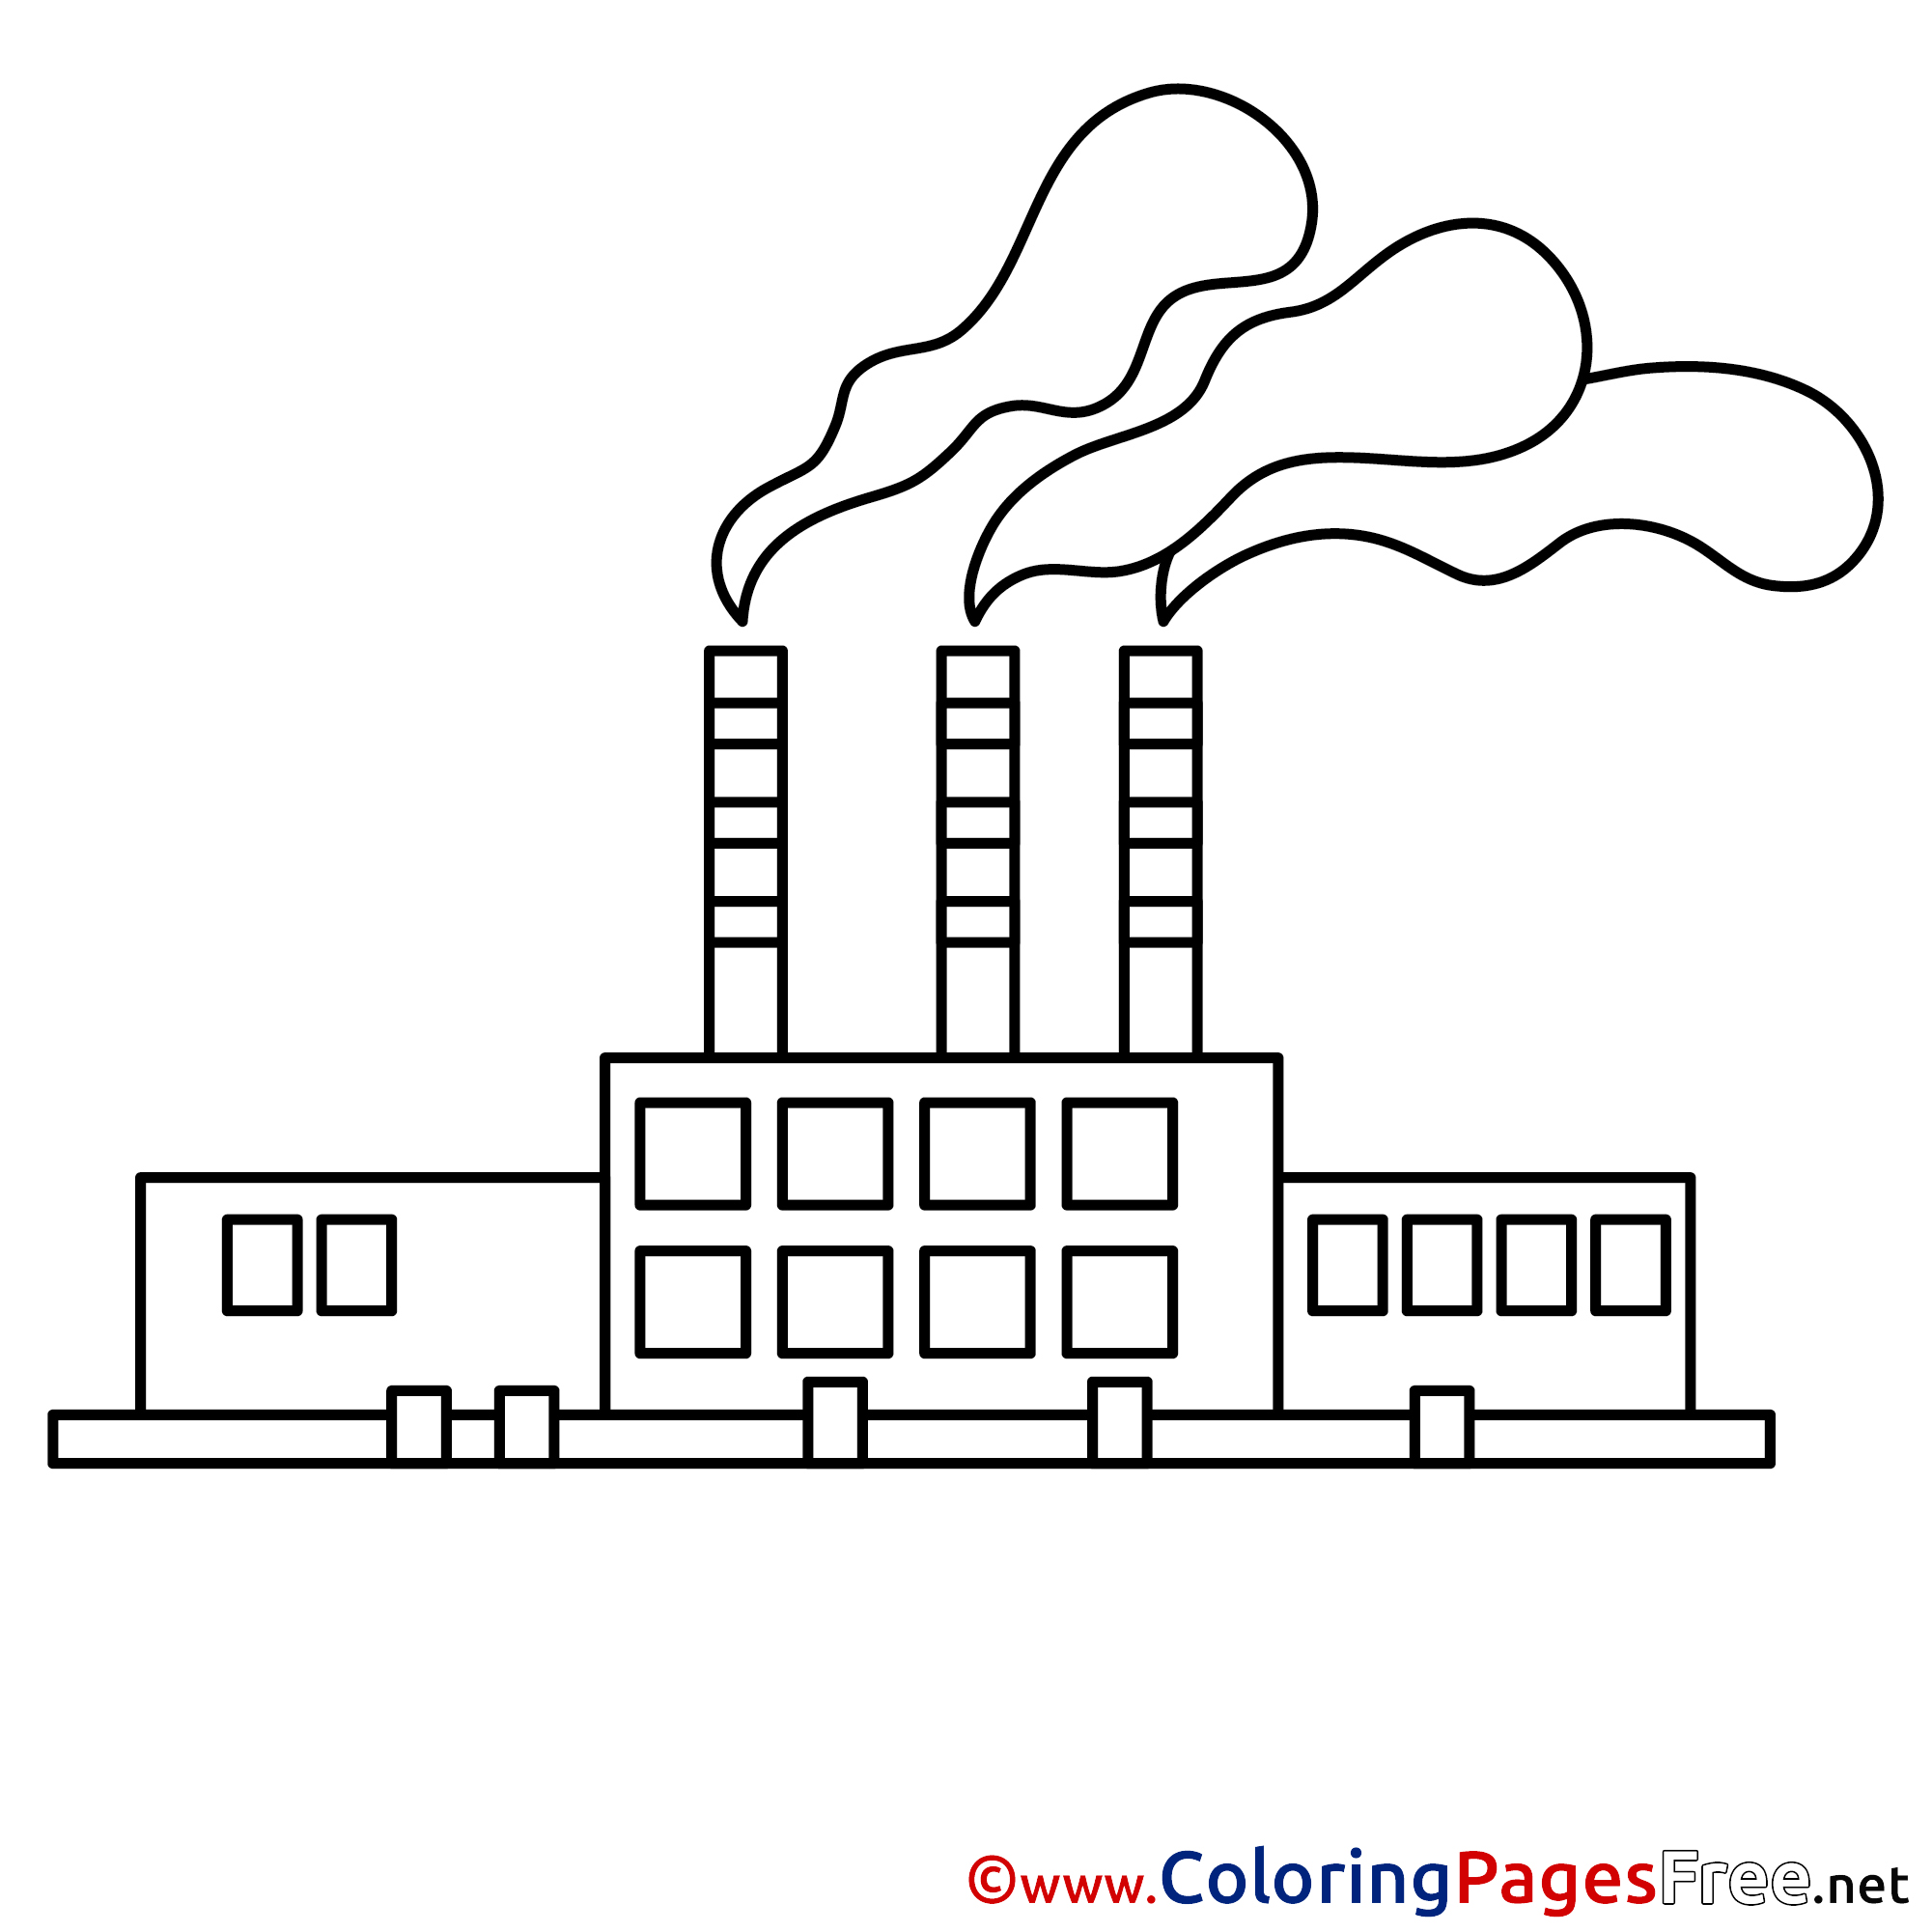 Pipes Smoke printable Coloring Pages for free